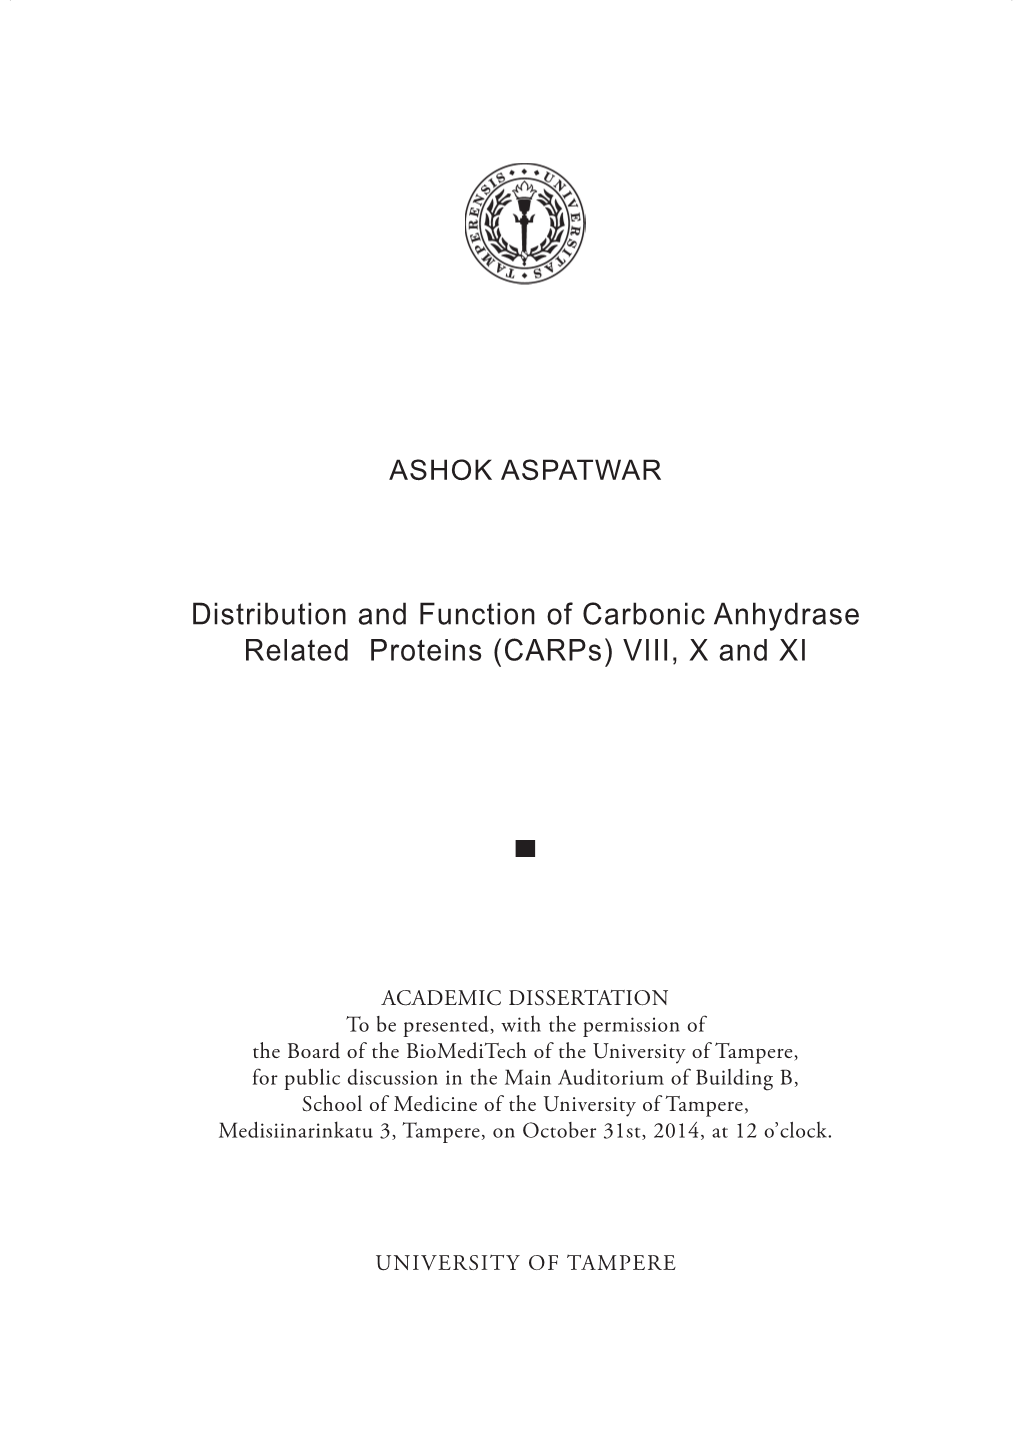 Distribution and Function of Carbonic Anhydrase Related Proteins (Carps) VIII, X and XI